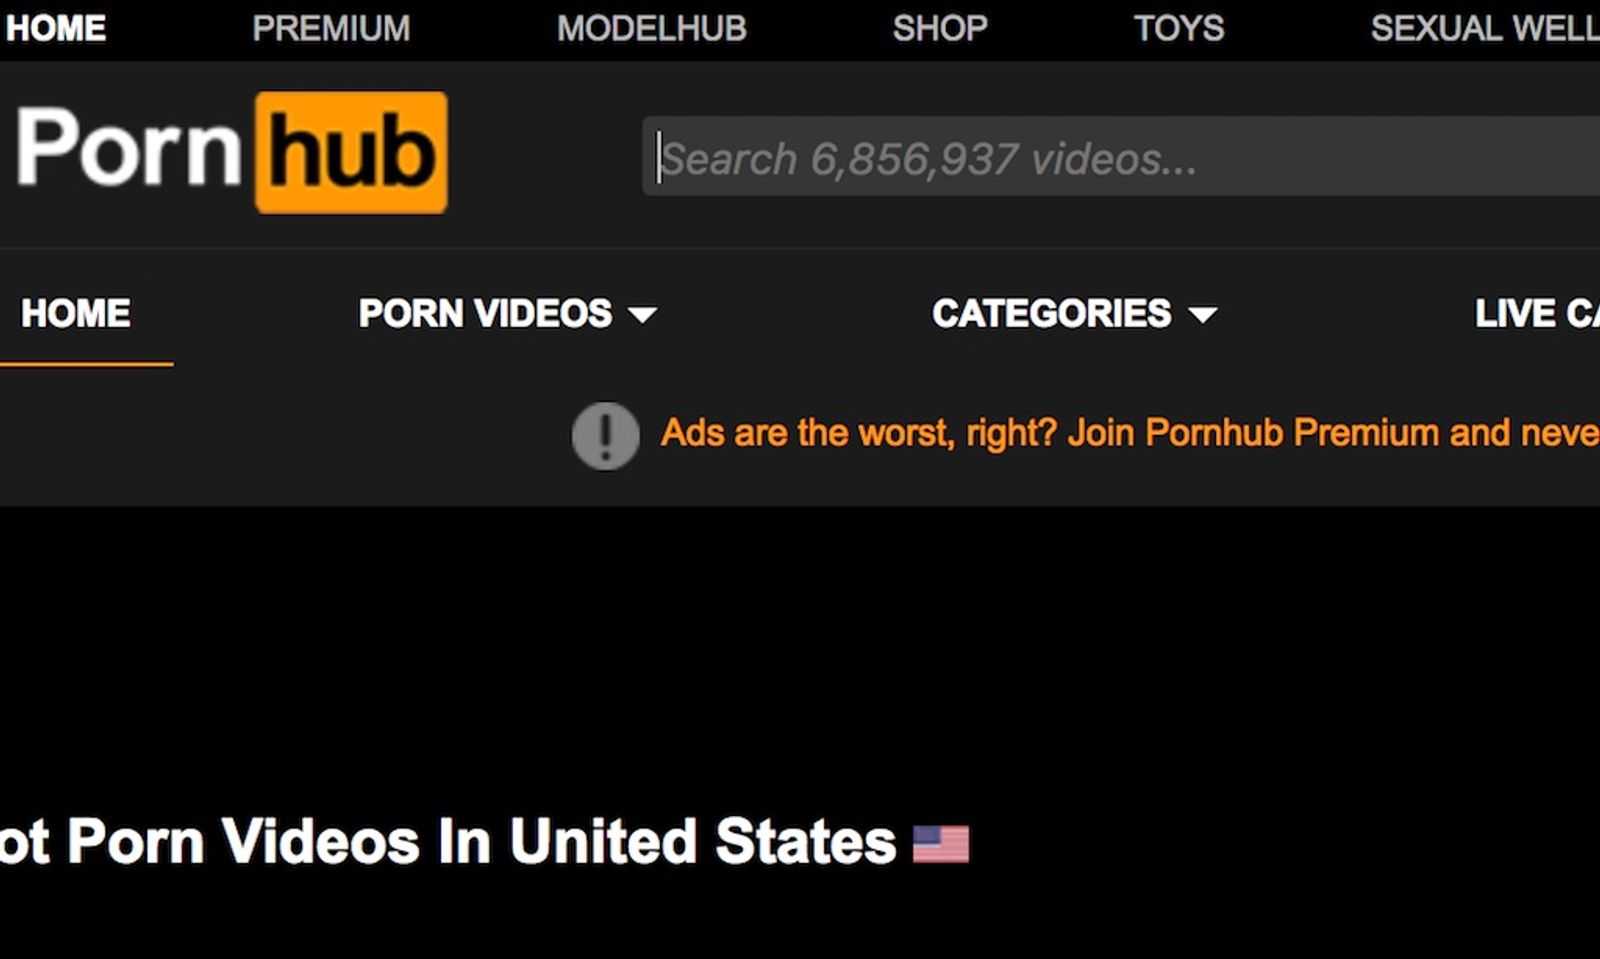 ‘MILF’ Bumps ‘Lesbian’ From PornHub's ‘Most Searched’ Top Ranking